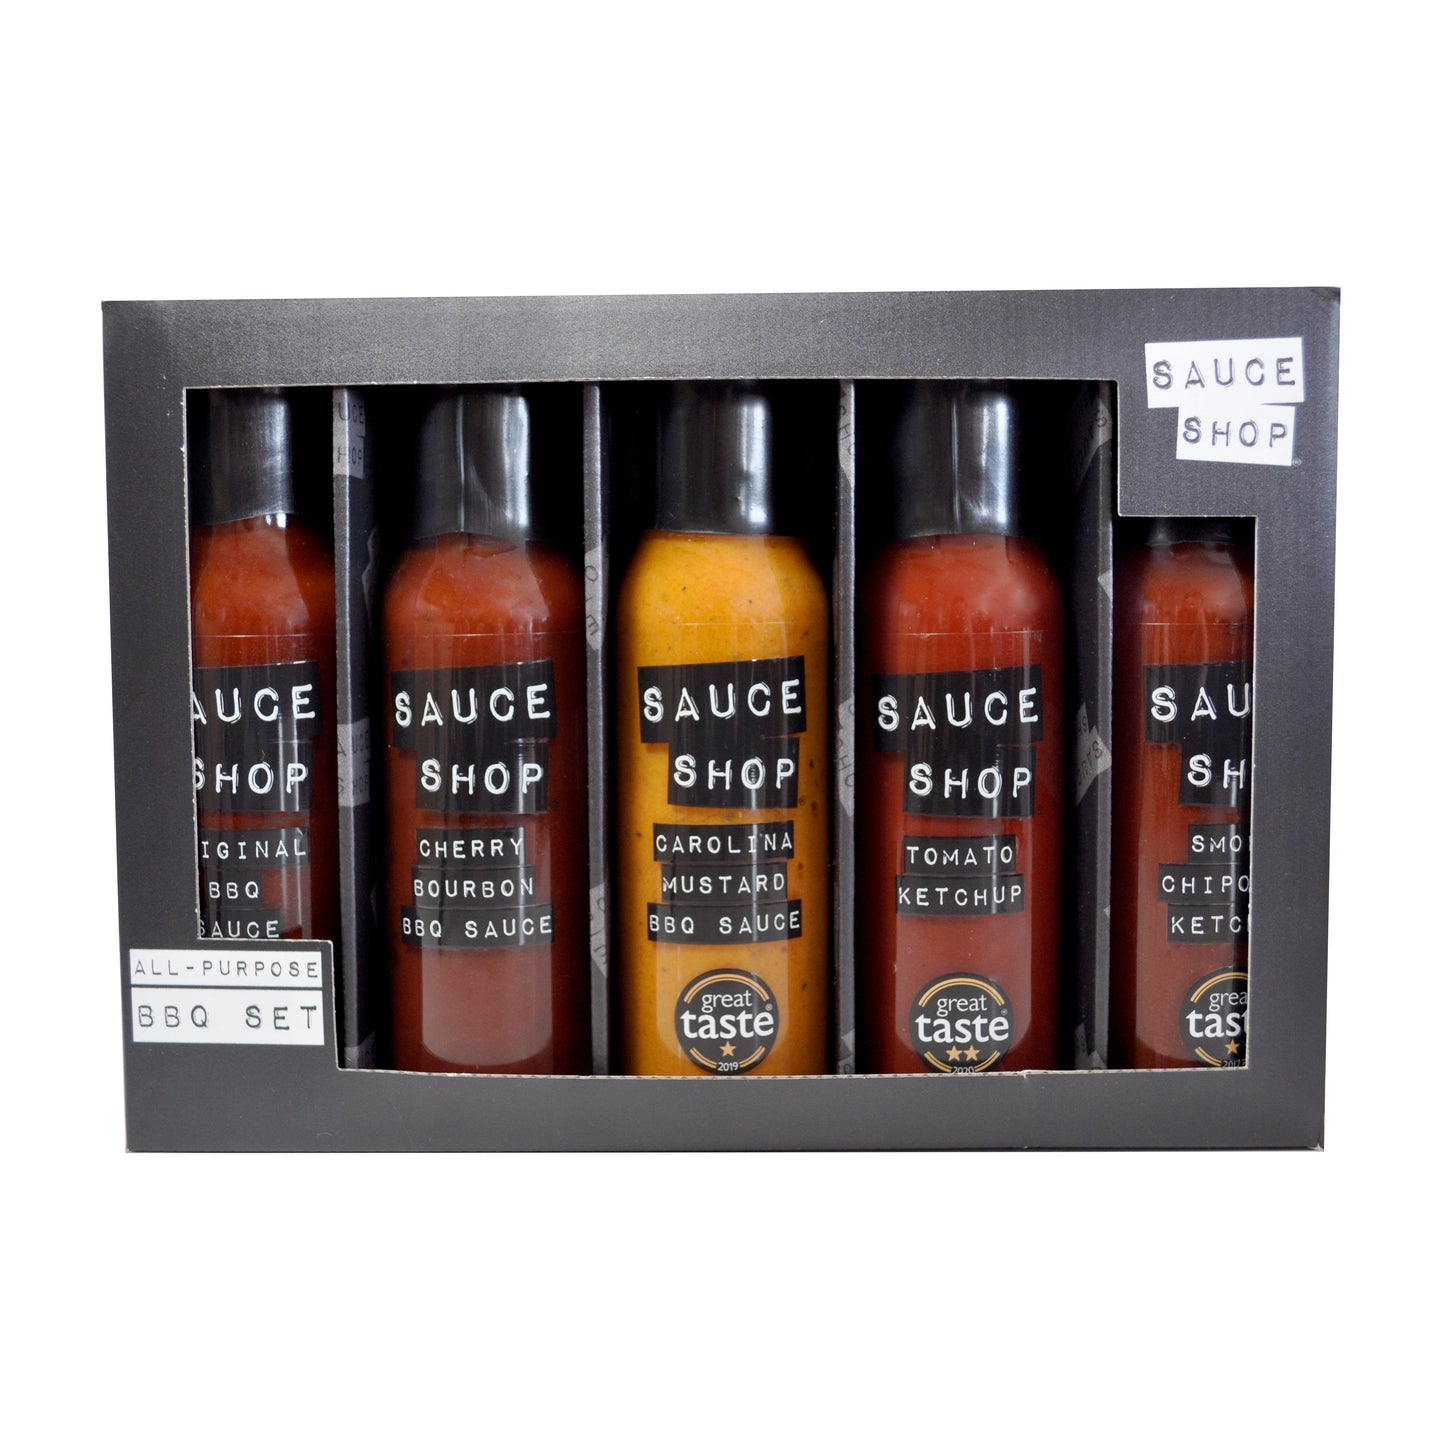 All-Purpose BBQ Set by Sauce Shop